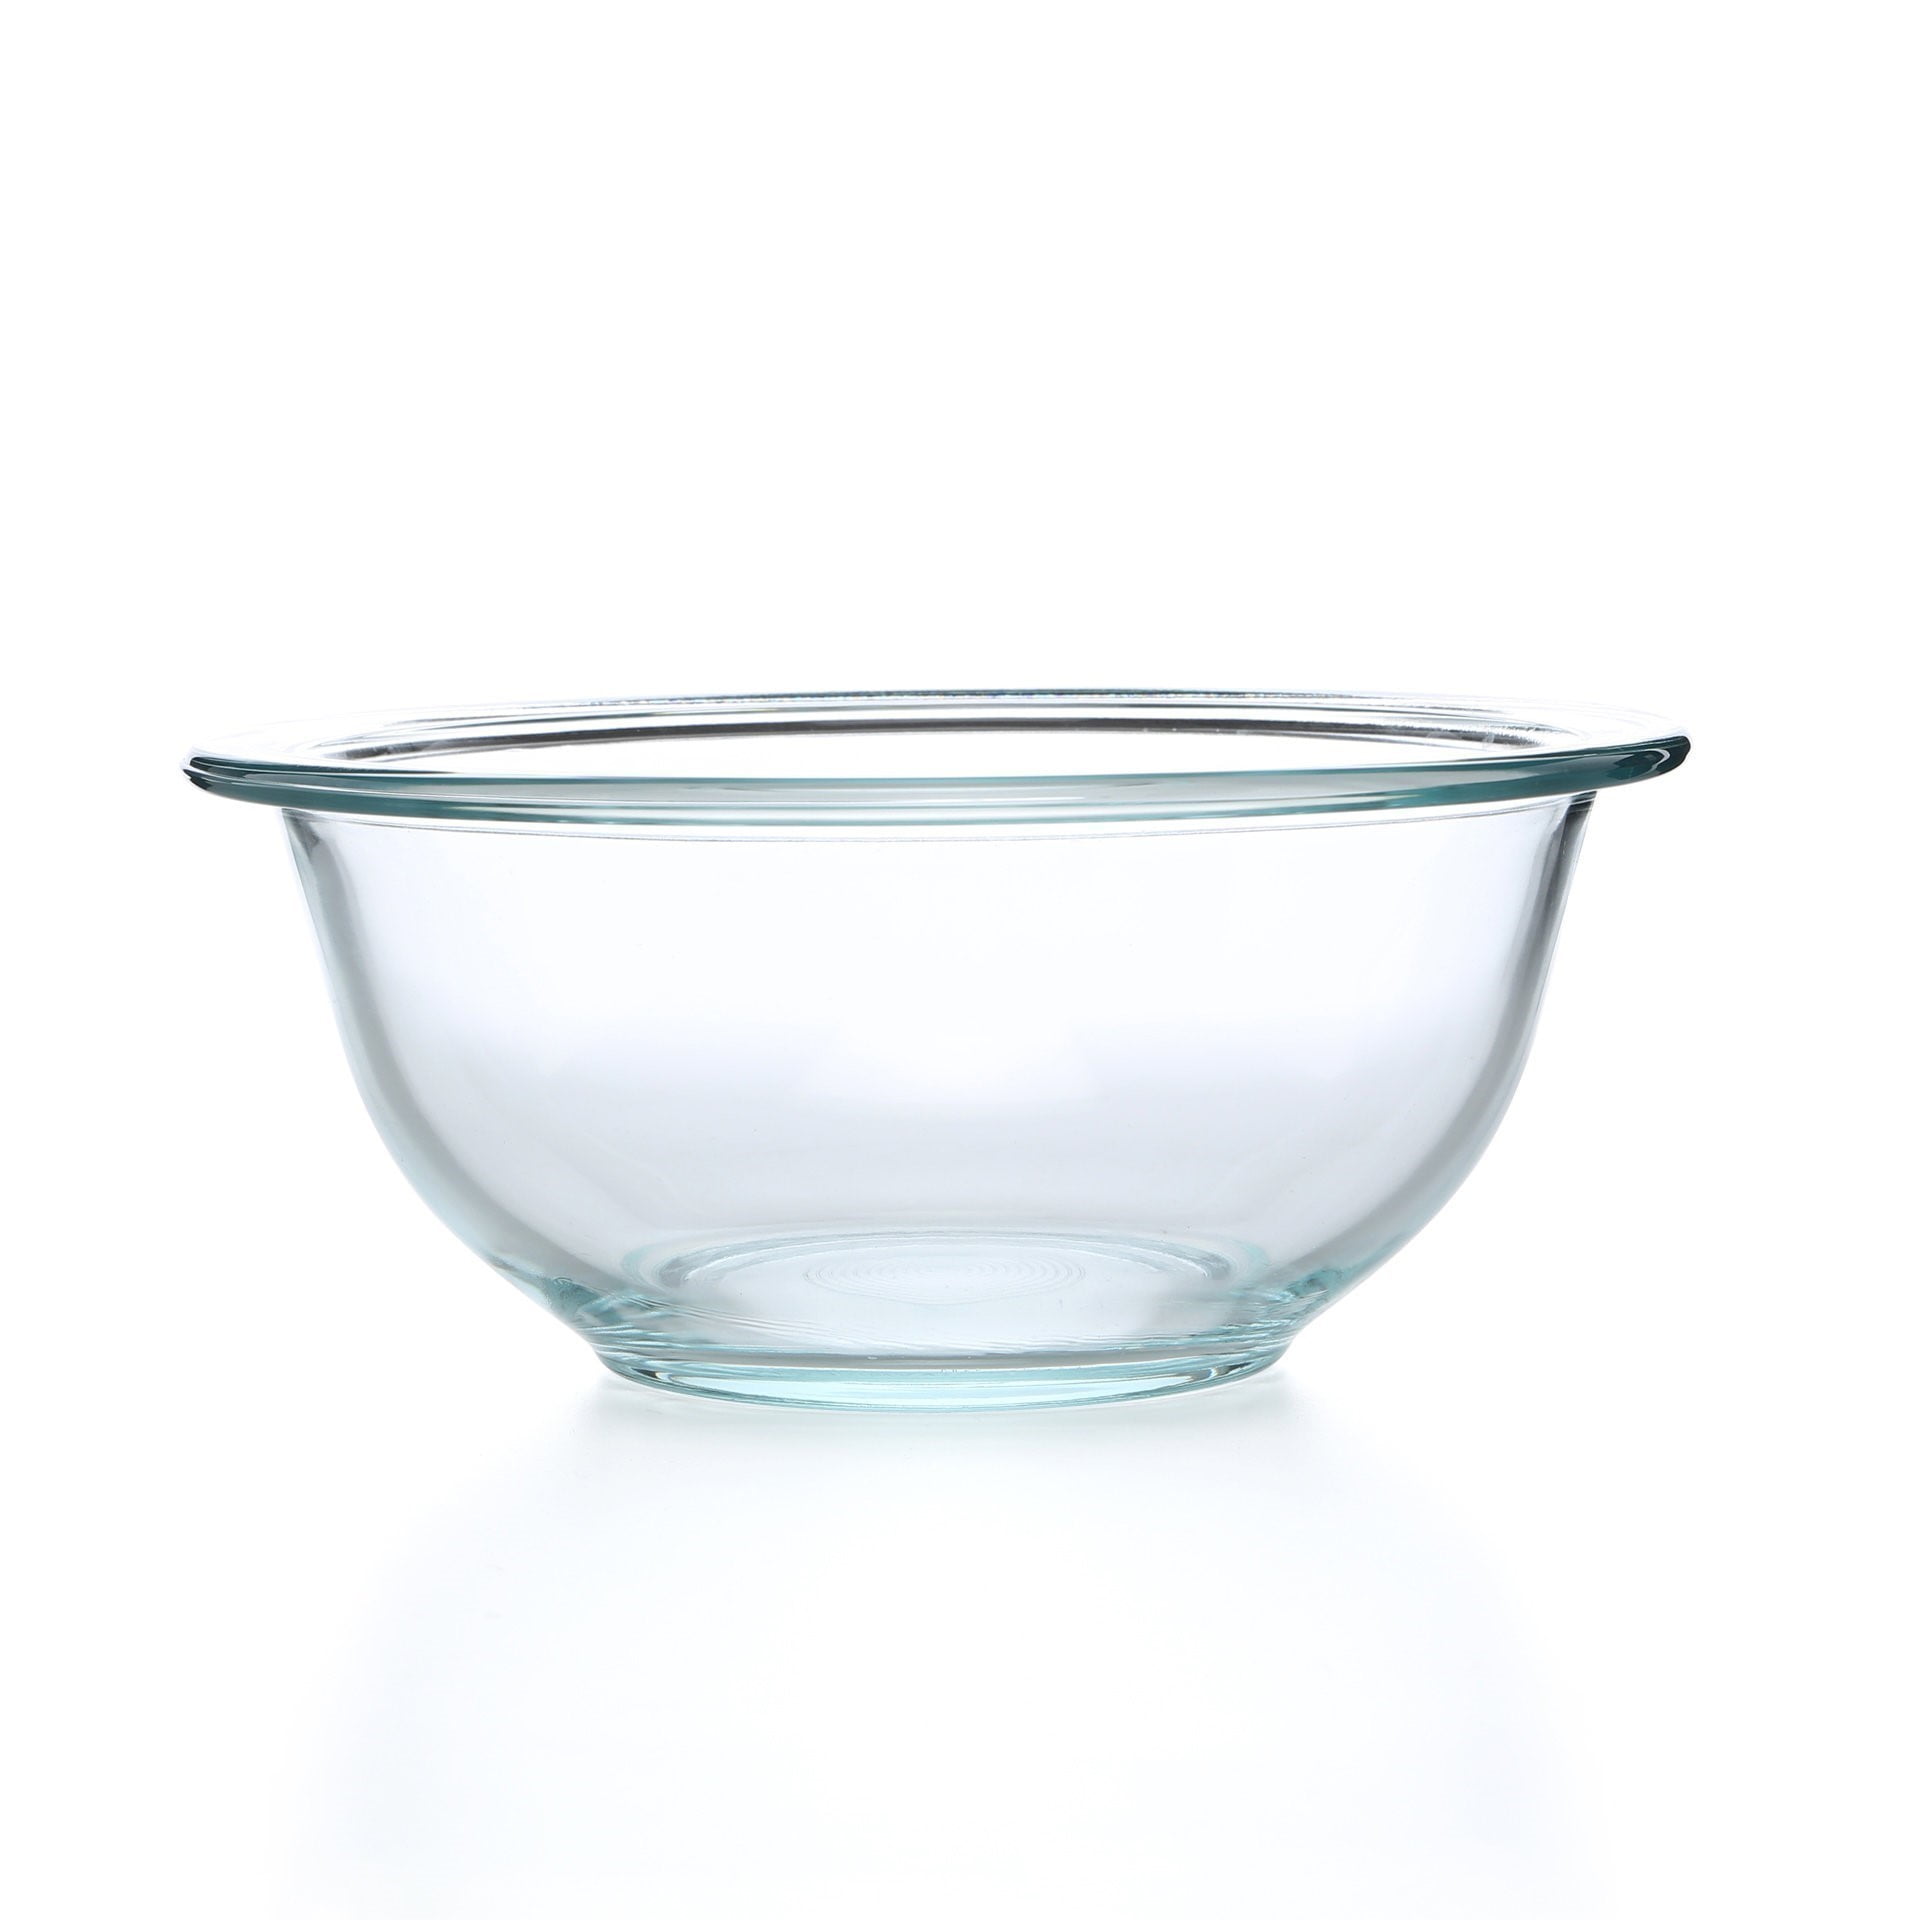 Pyrex Prepware, 2-1/2-Quart Rimmed Mixing Bowl, Clear - 1 each (Pack of 16),  16 pack - Food 4 Less